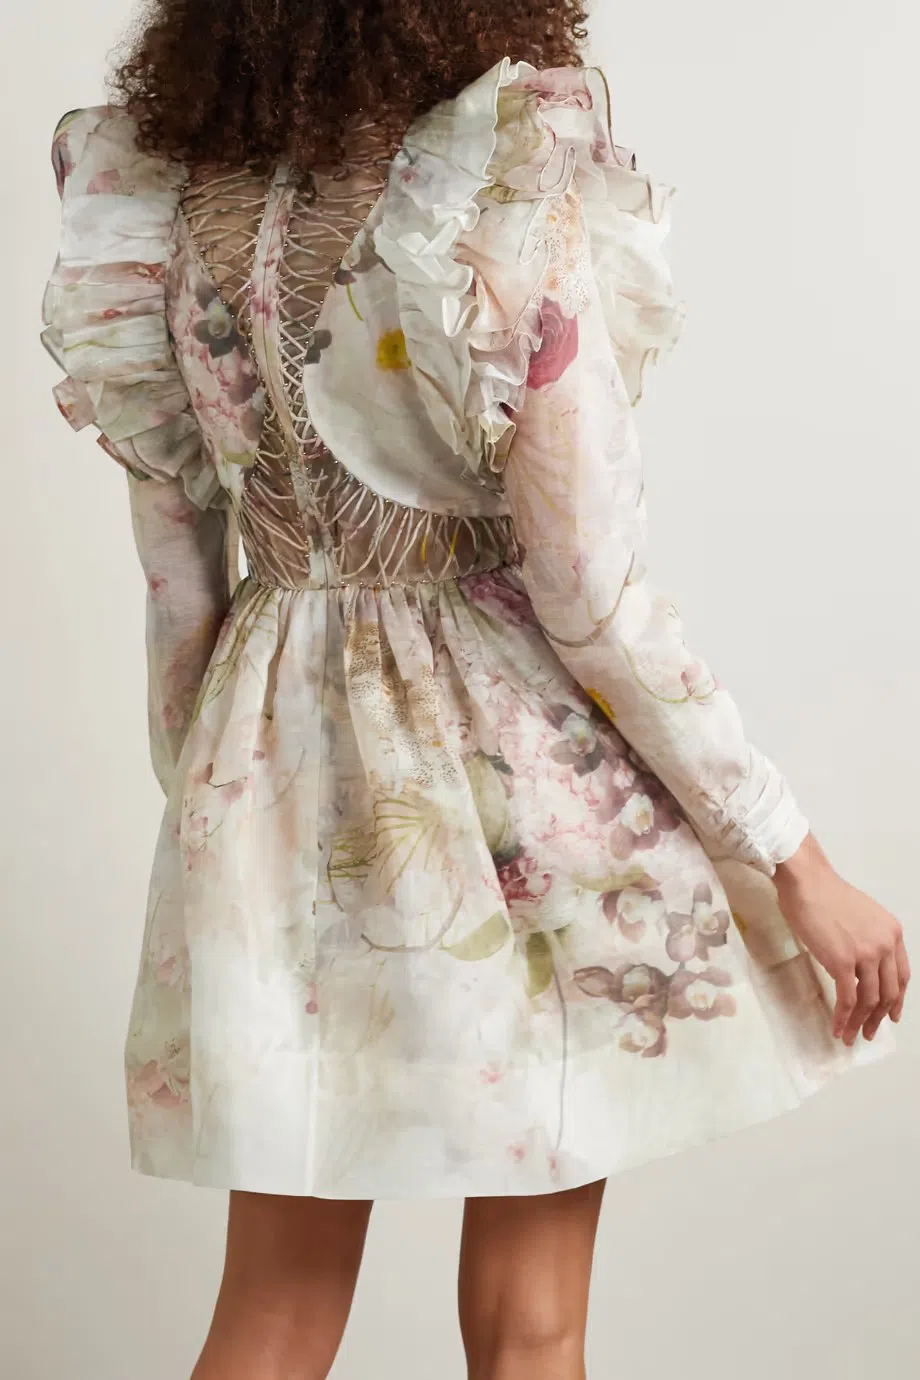 SPRING READY TO WEAR 2022 CAMPAIGN ZIMMERMANN, 57% OFF